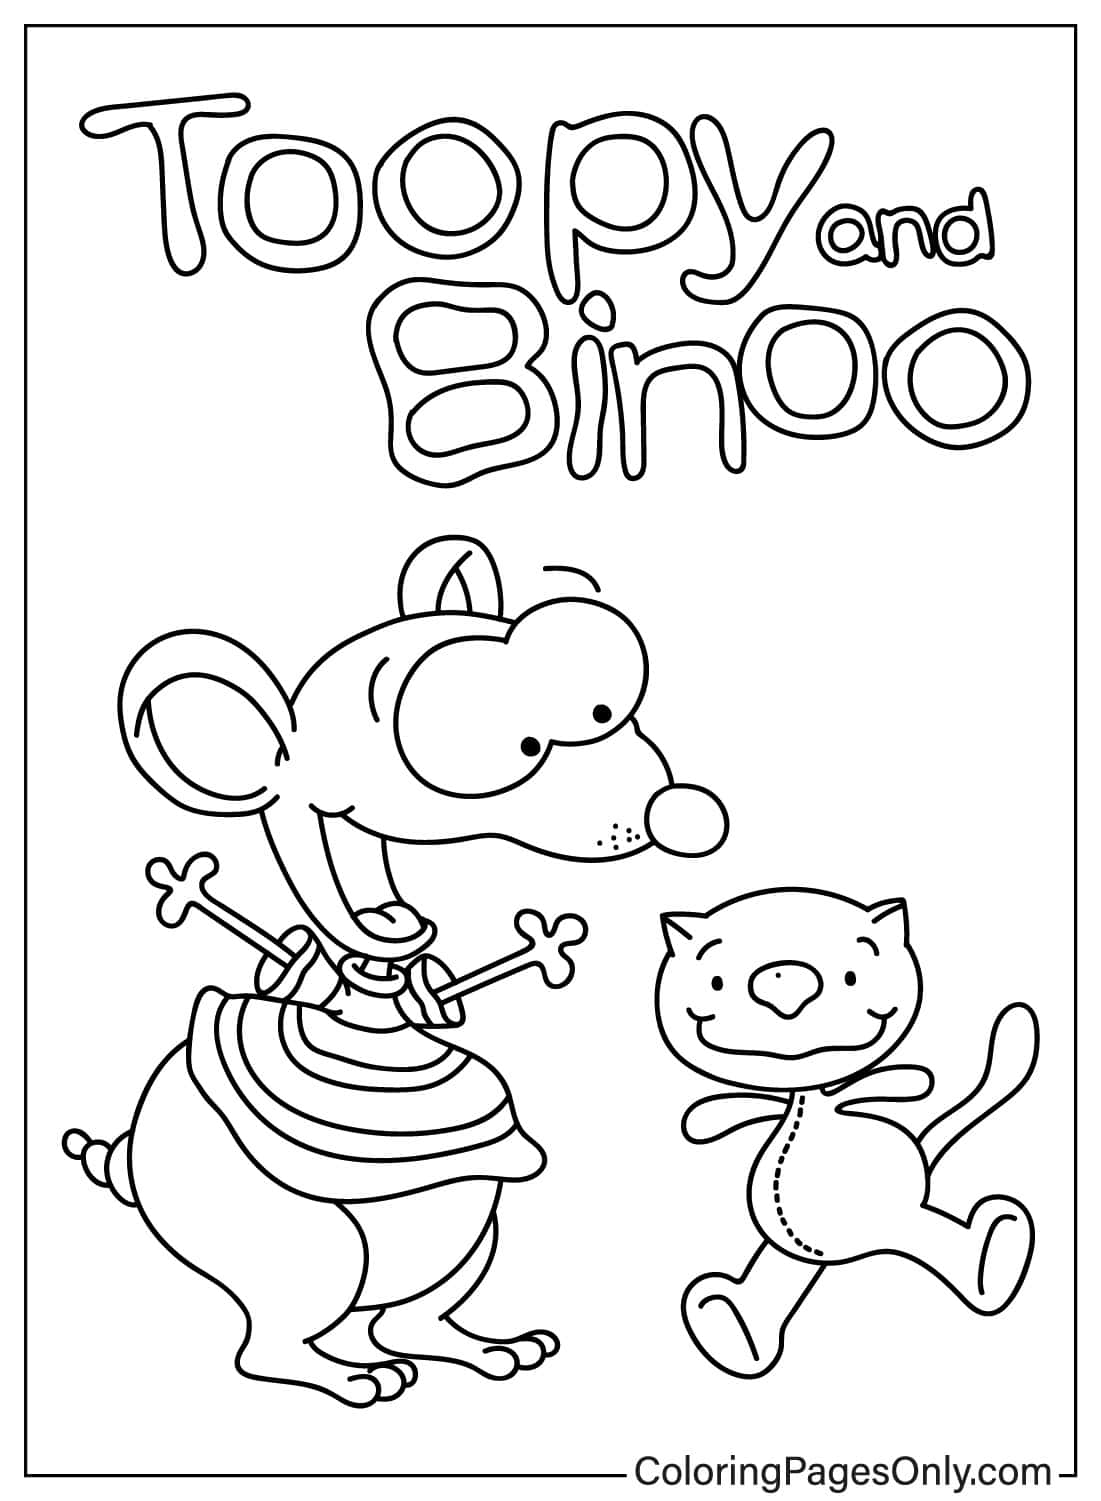 Toopy and Binoo from Toopy and Binoo the Movie